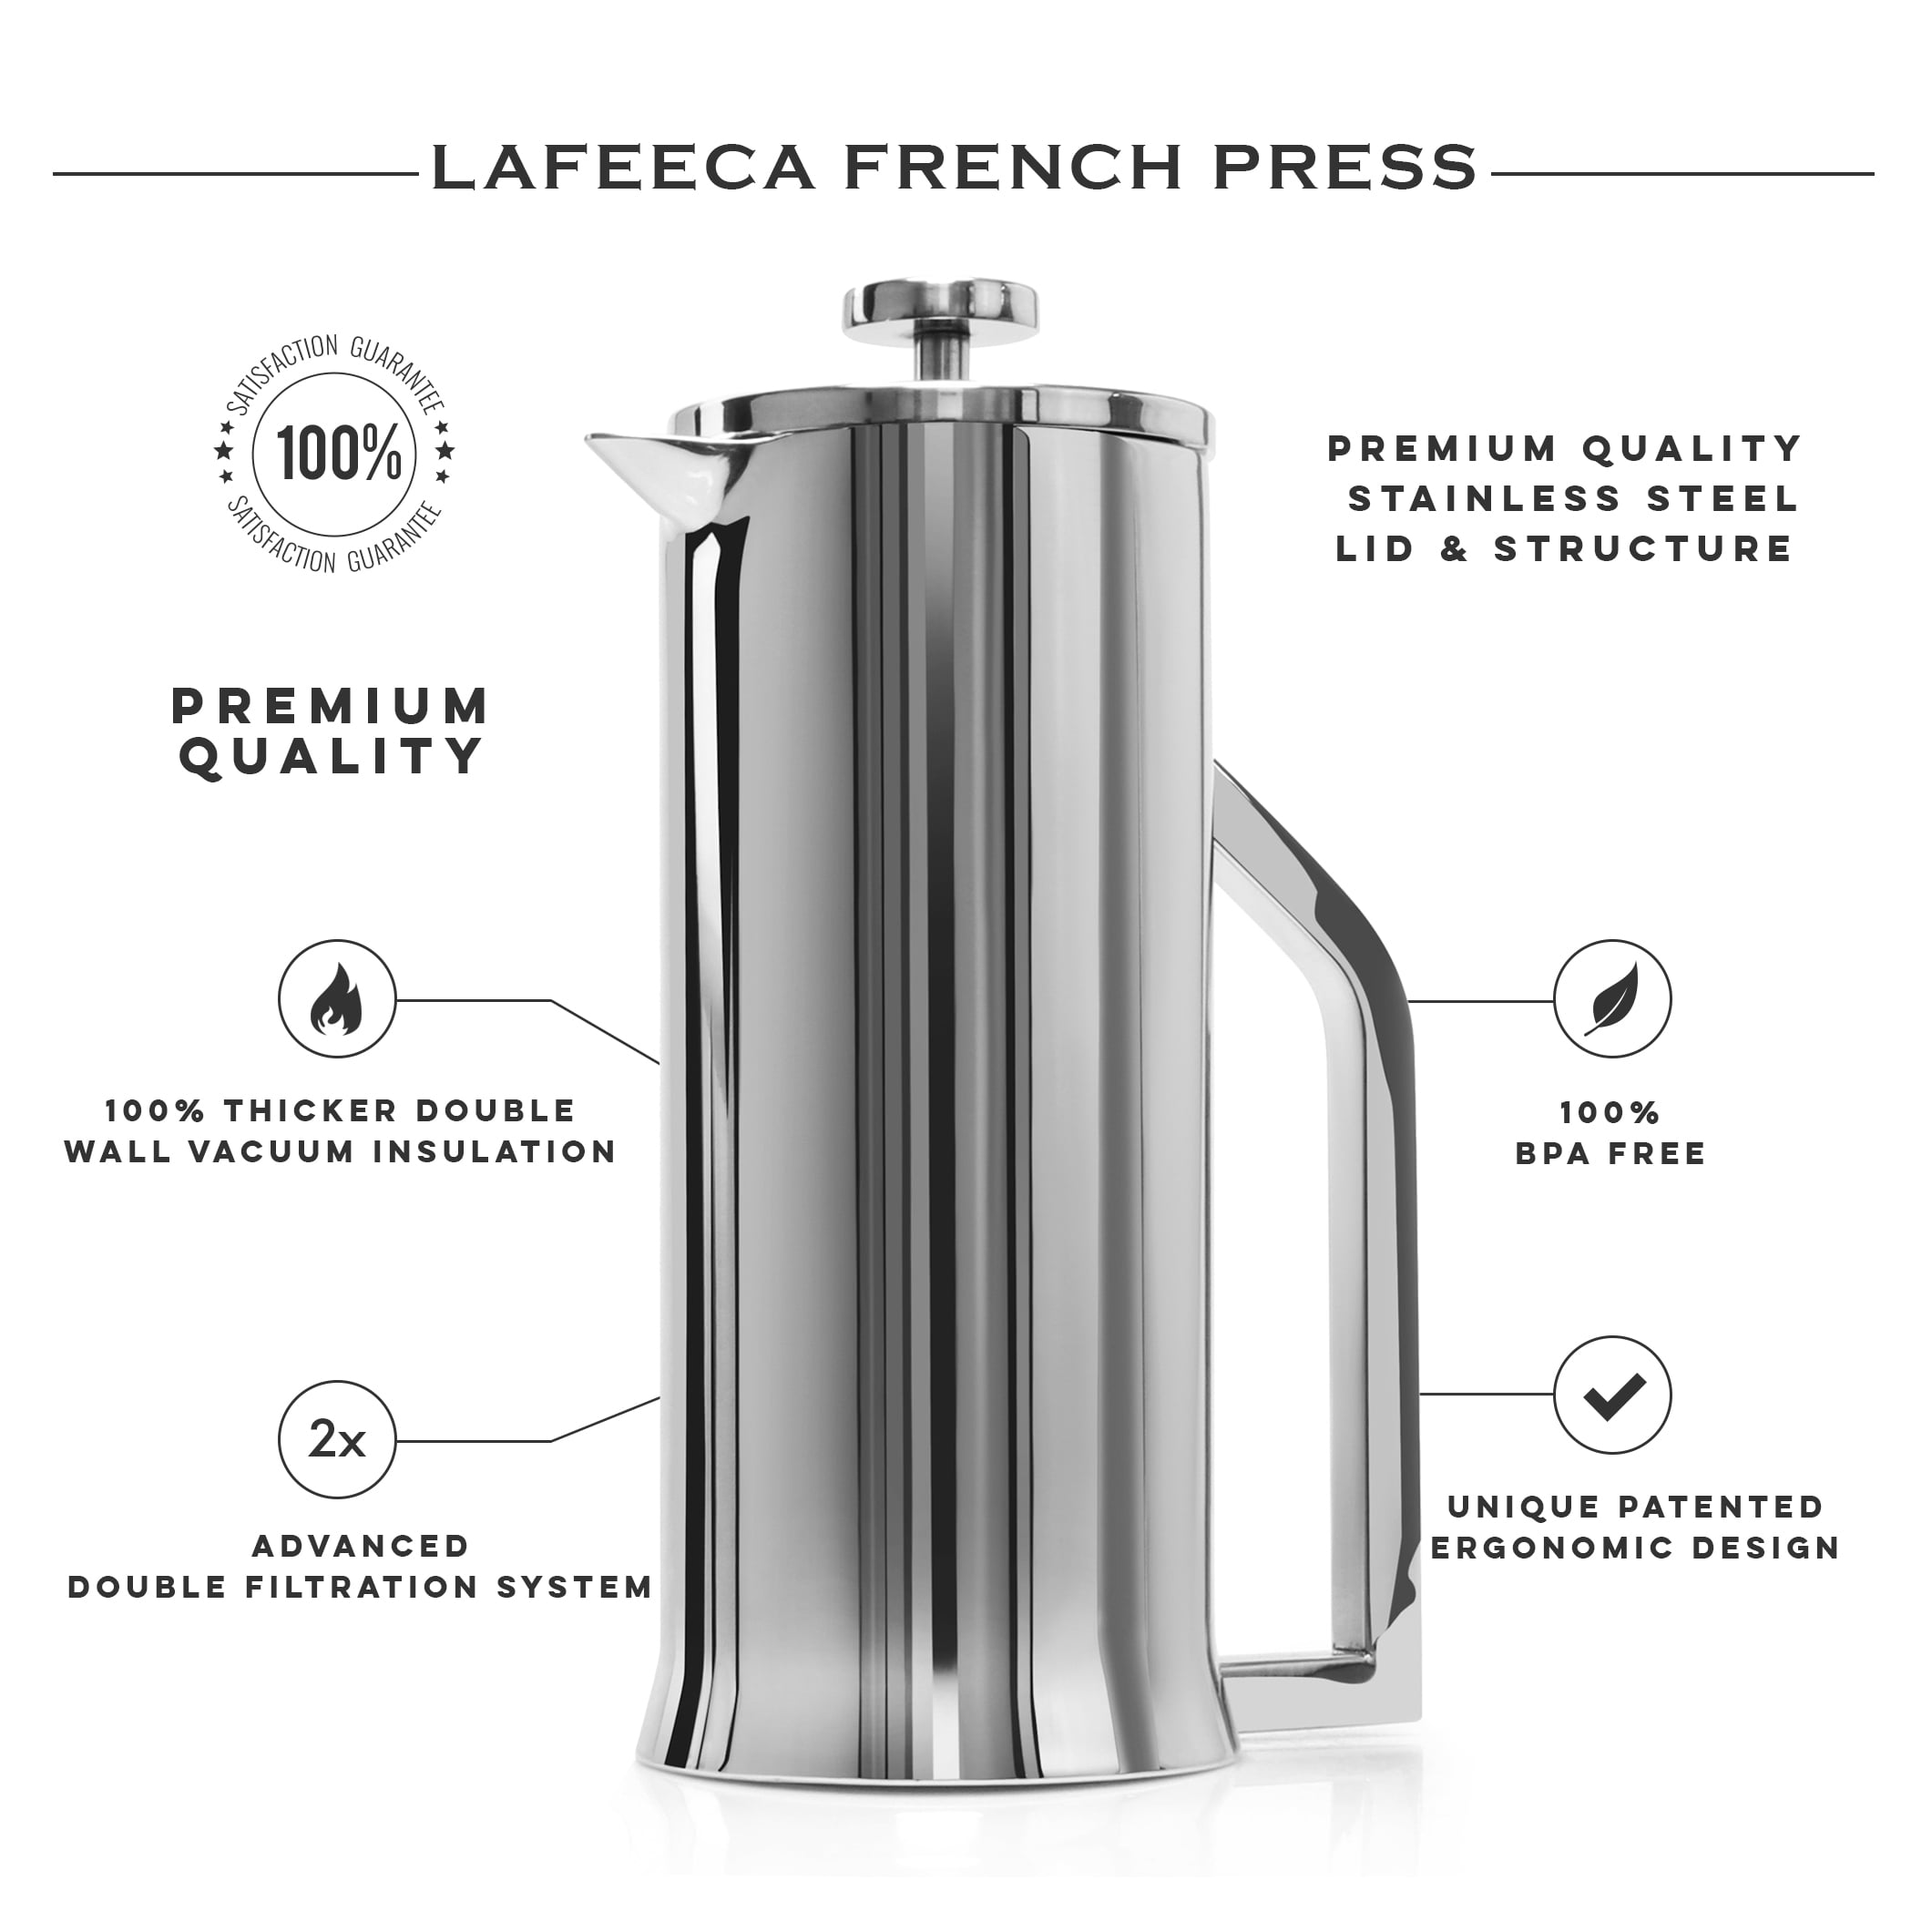 Lafeeca Stainless Steel Double Wall Vacuum Insulated French Press Coffee Maker - 34 oz - Red